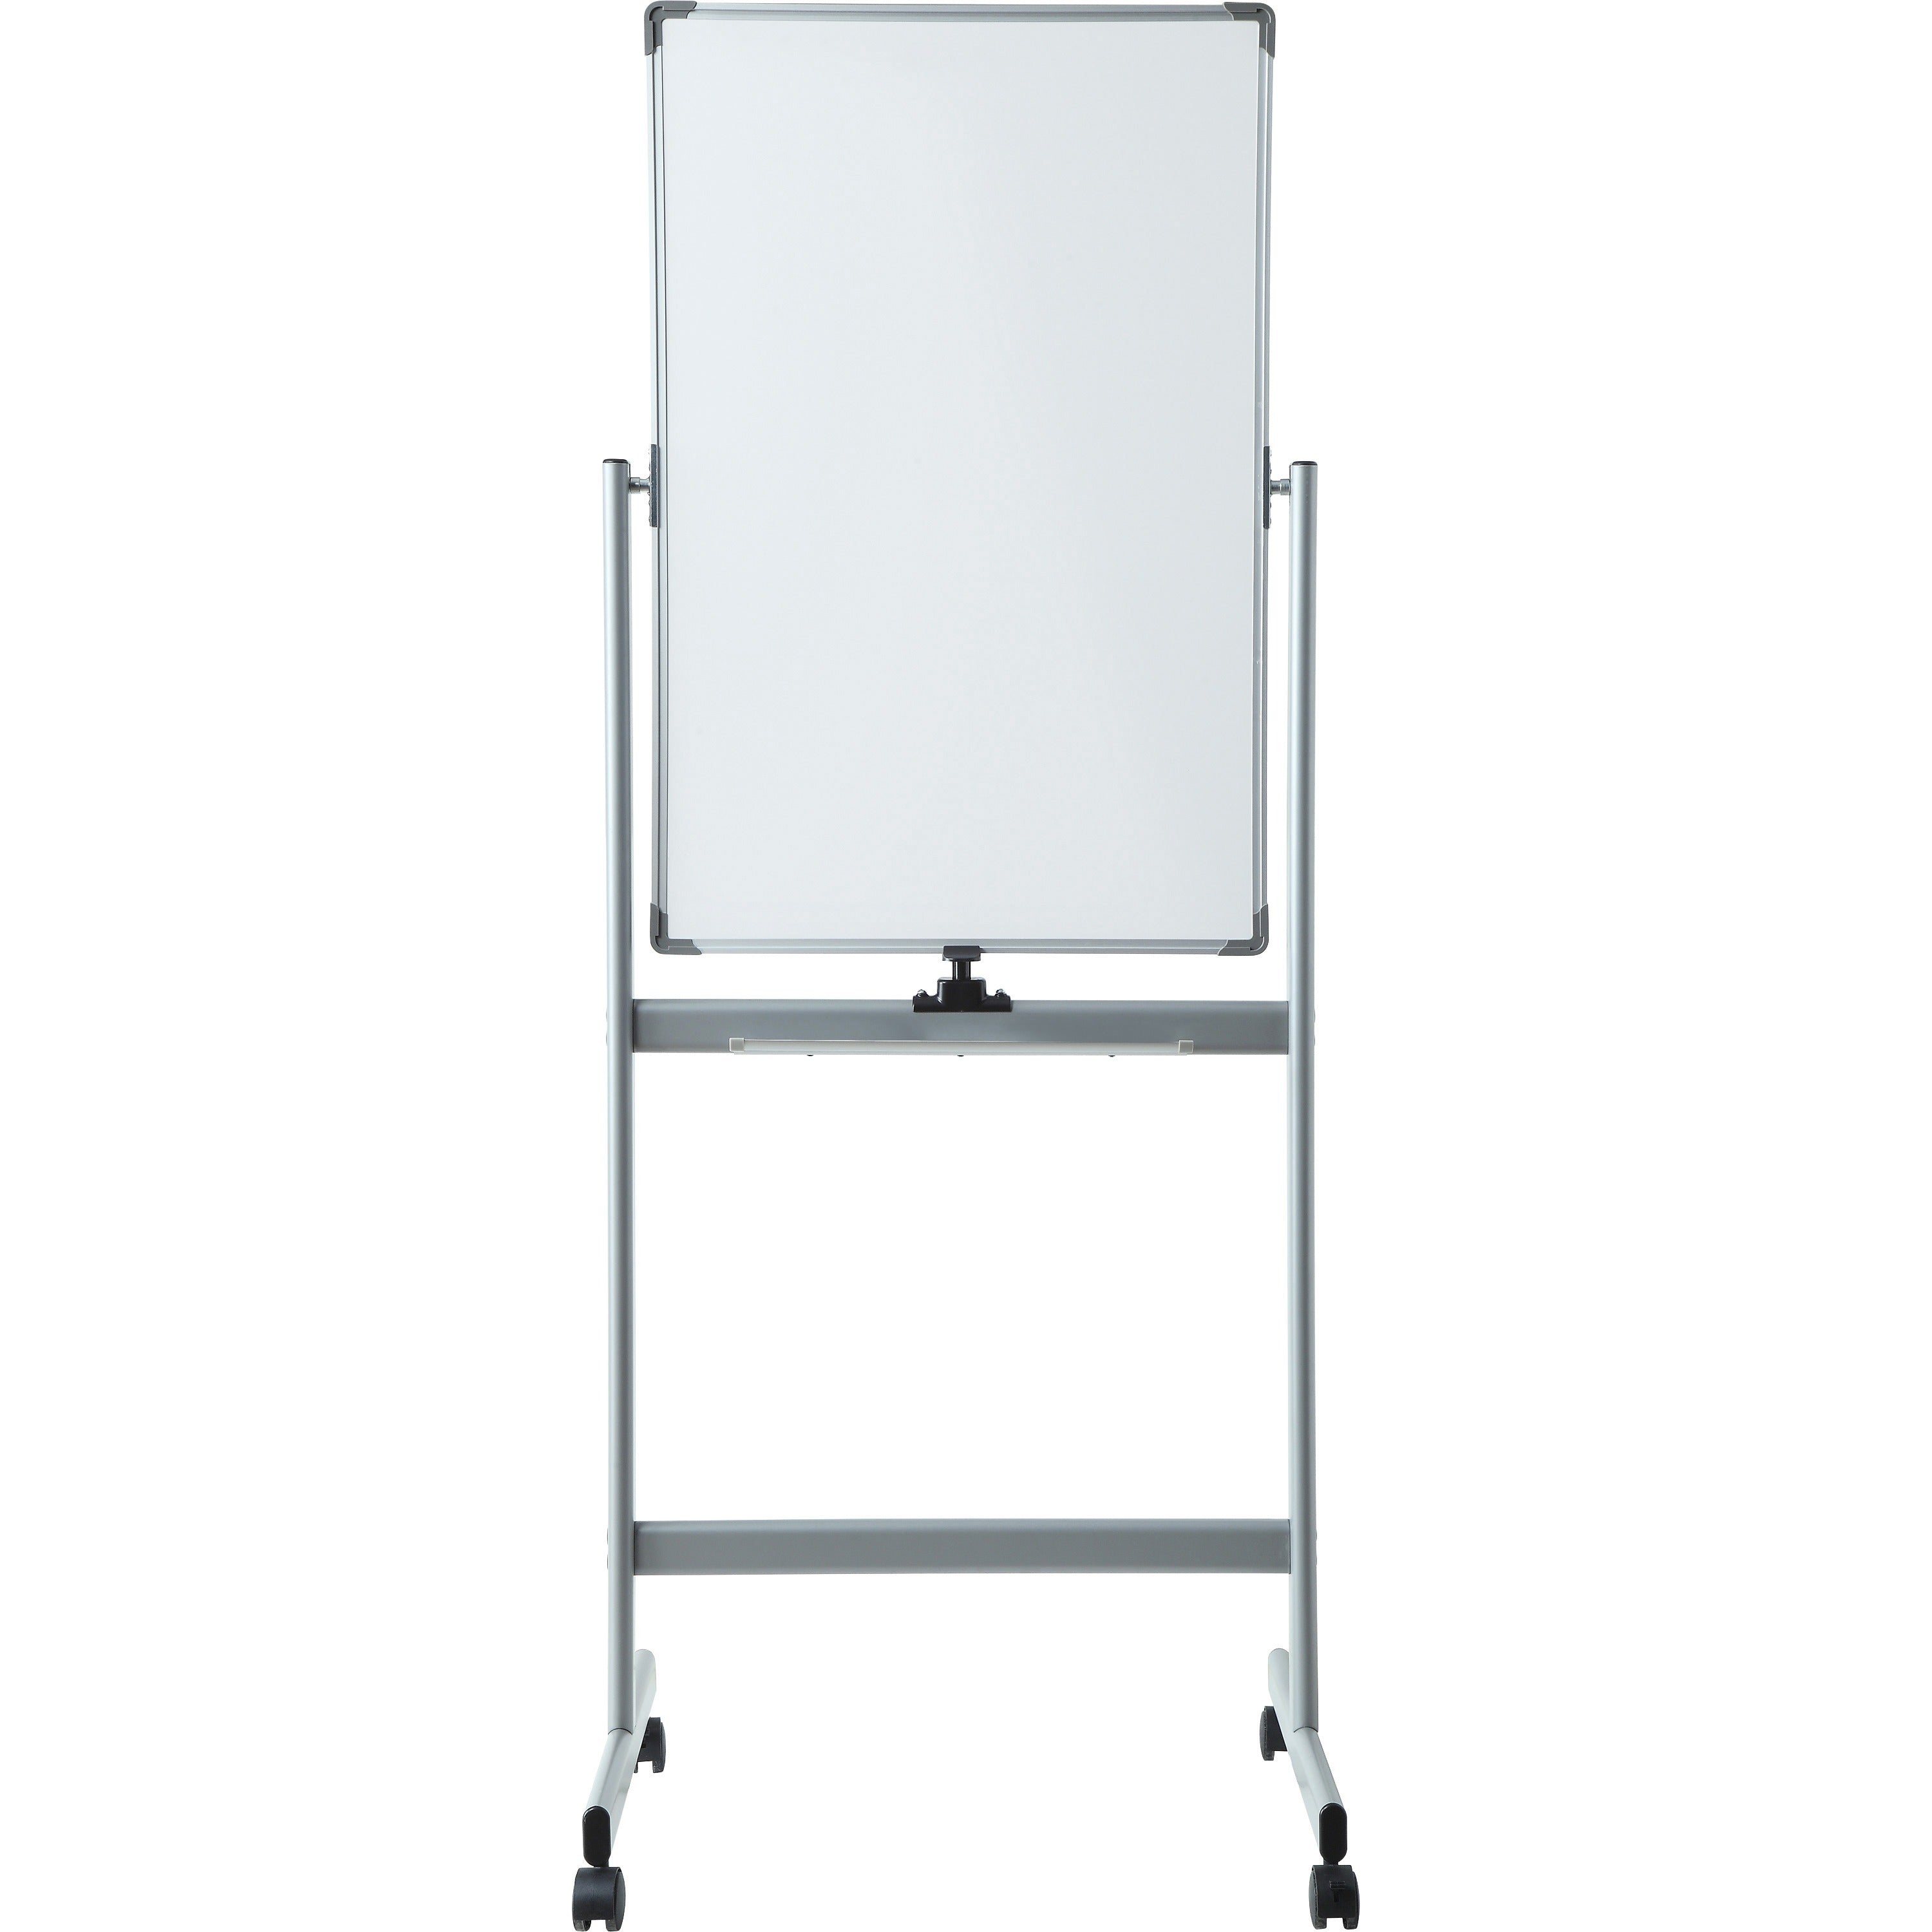 lorell-double-sided-magnetic-whiteboard-easel-24-2-ft-width-x-36-3-ft-height-white-surface-square-vertical-floor-standing-magnetic-1-each_llr52567 - 2